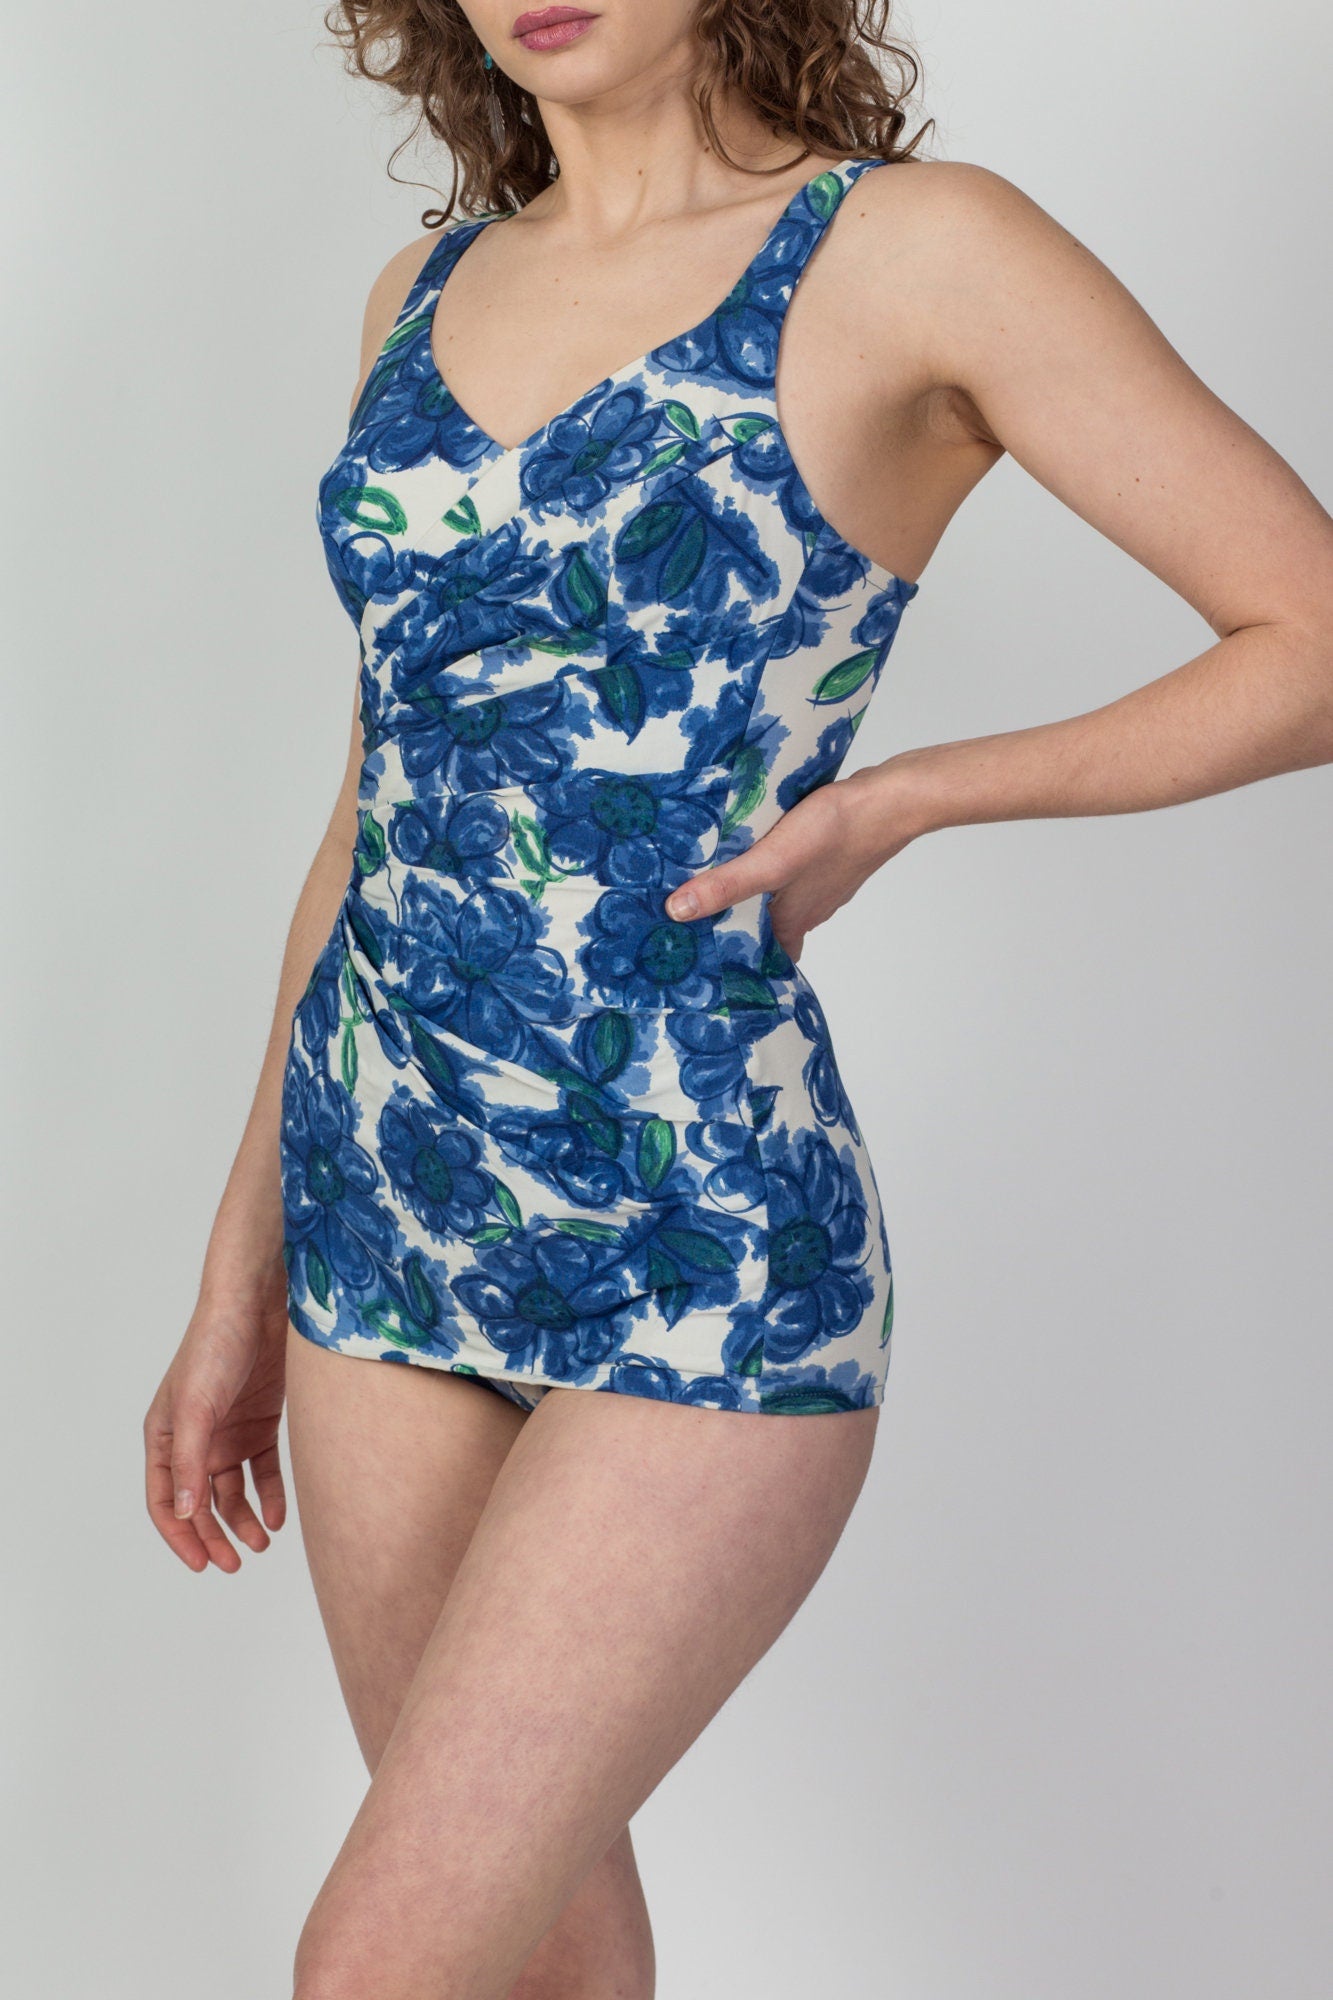 50s 60s Catalina Blue Floral Skirt Swimsuit - Extra Small 